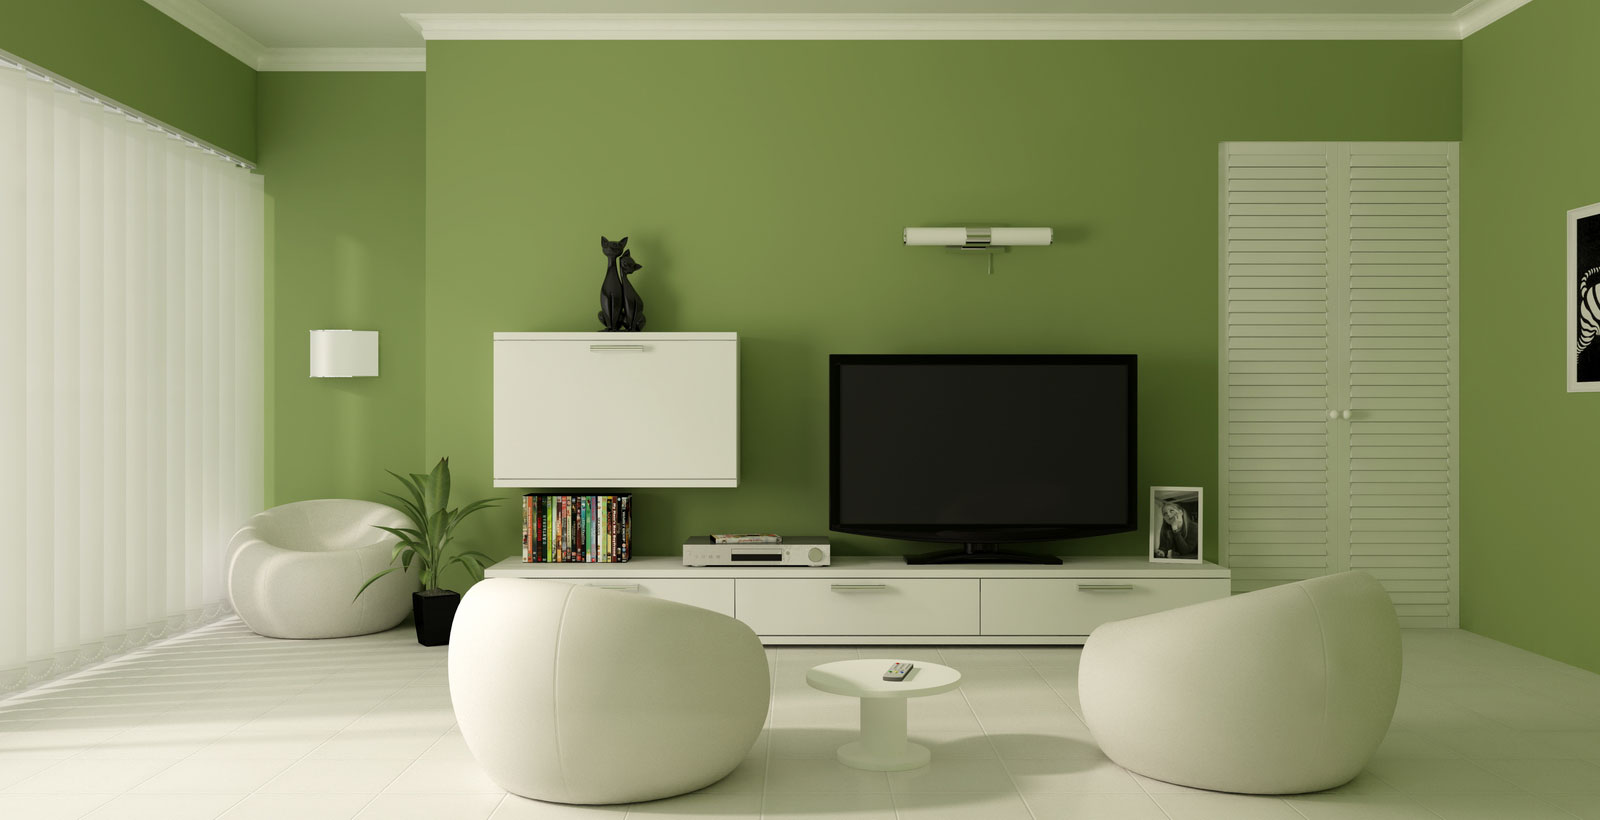 Green Living Interior Modern Green Living Room Design Interior Decorated With White Sofa And White TV Cabinet Made From Wooden Material Living Room Green Living Room That Bringing Nature Right Into Your Home